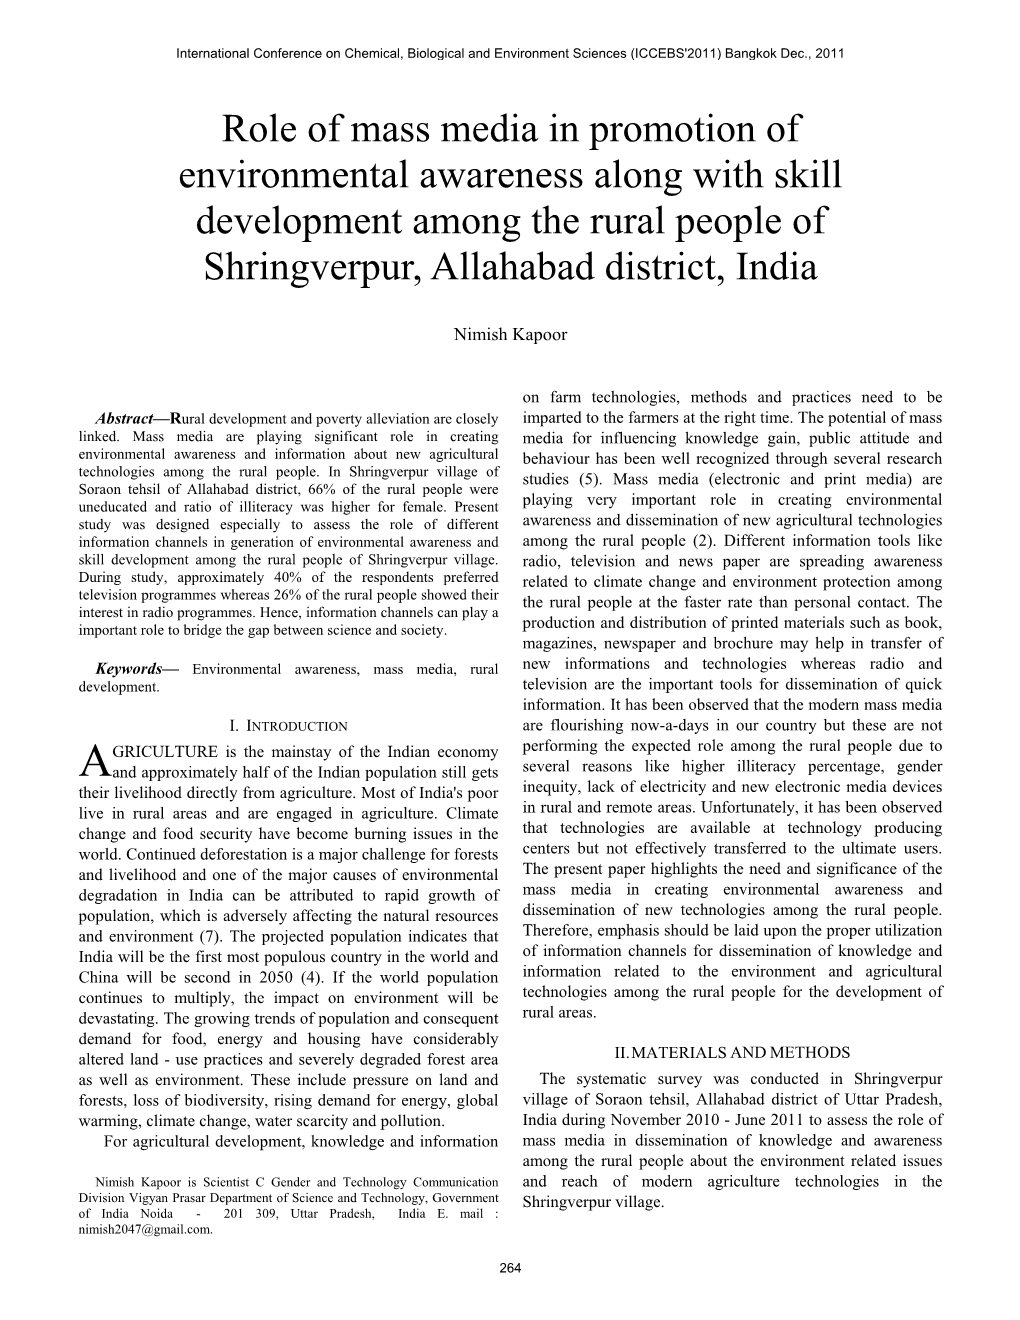 Role of Mass Media in Promotion of Environmental Awareness Along with Skill Development Among the Rural People of Shringverpur, Allahabad District, India